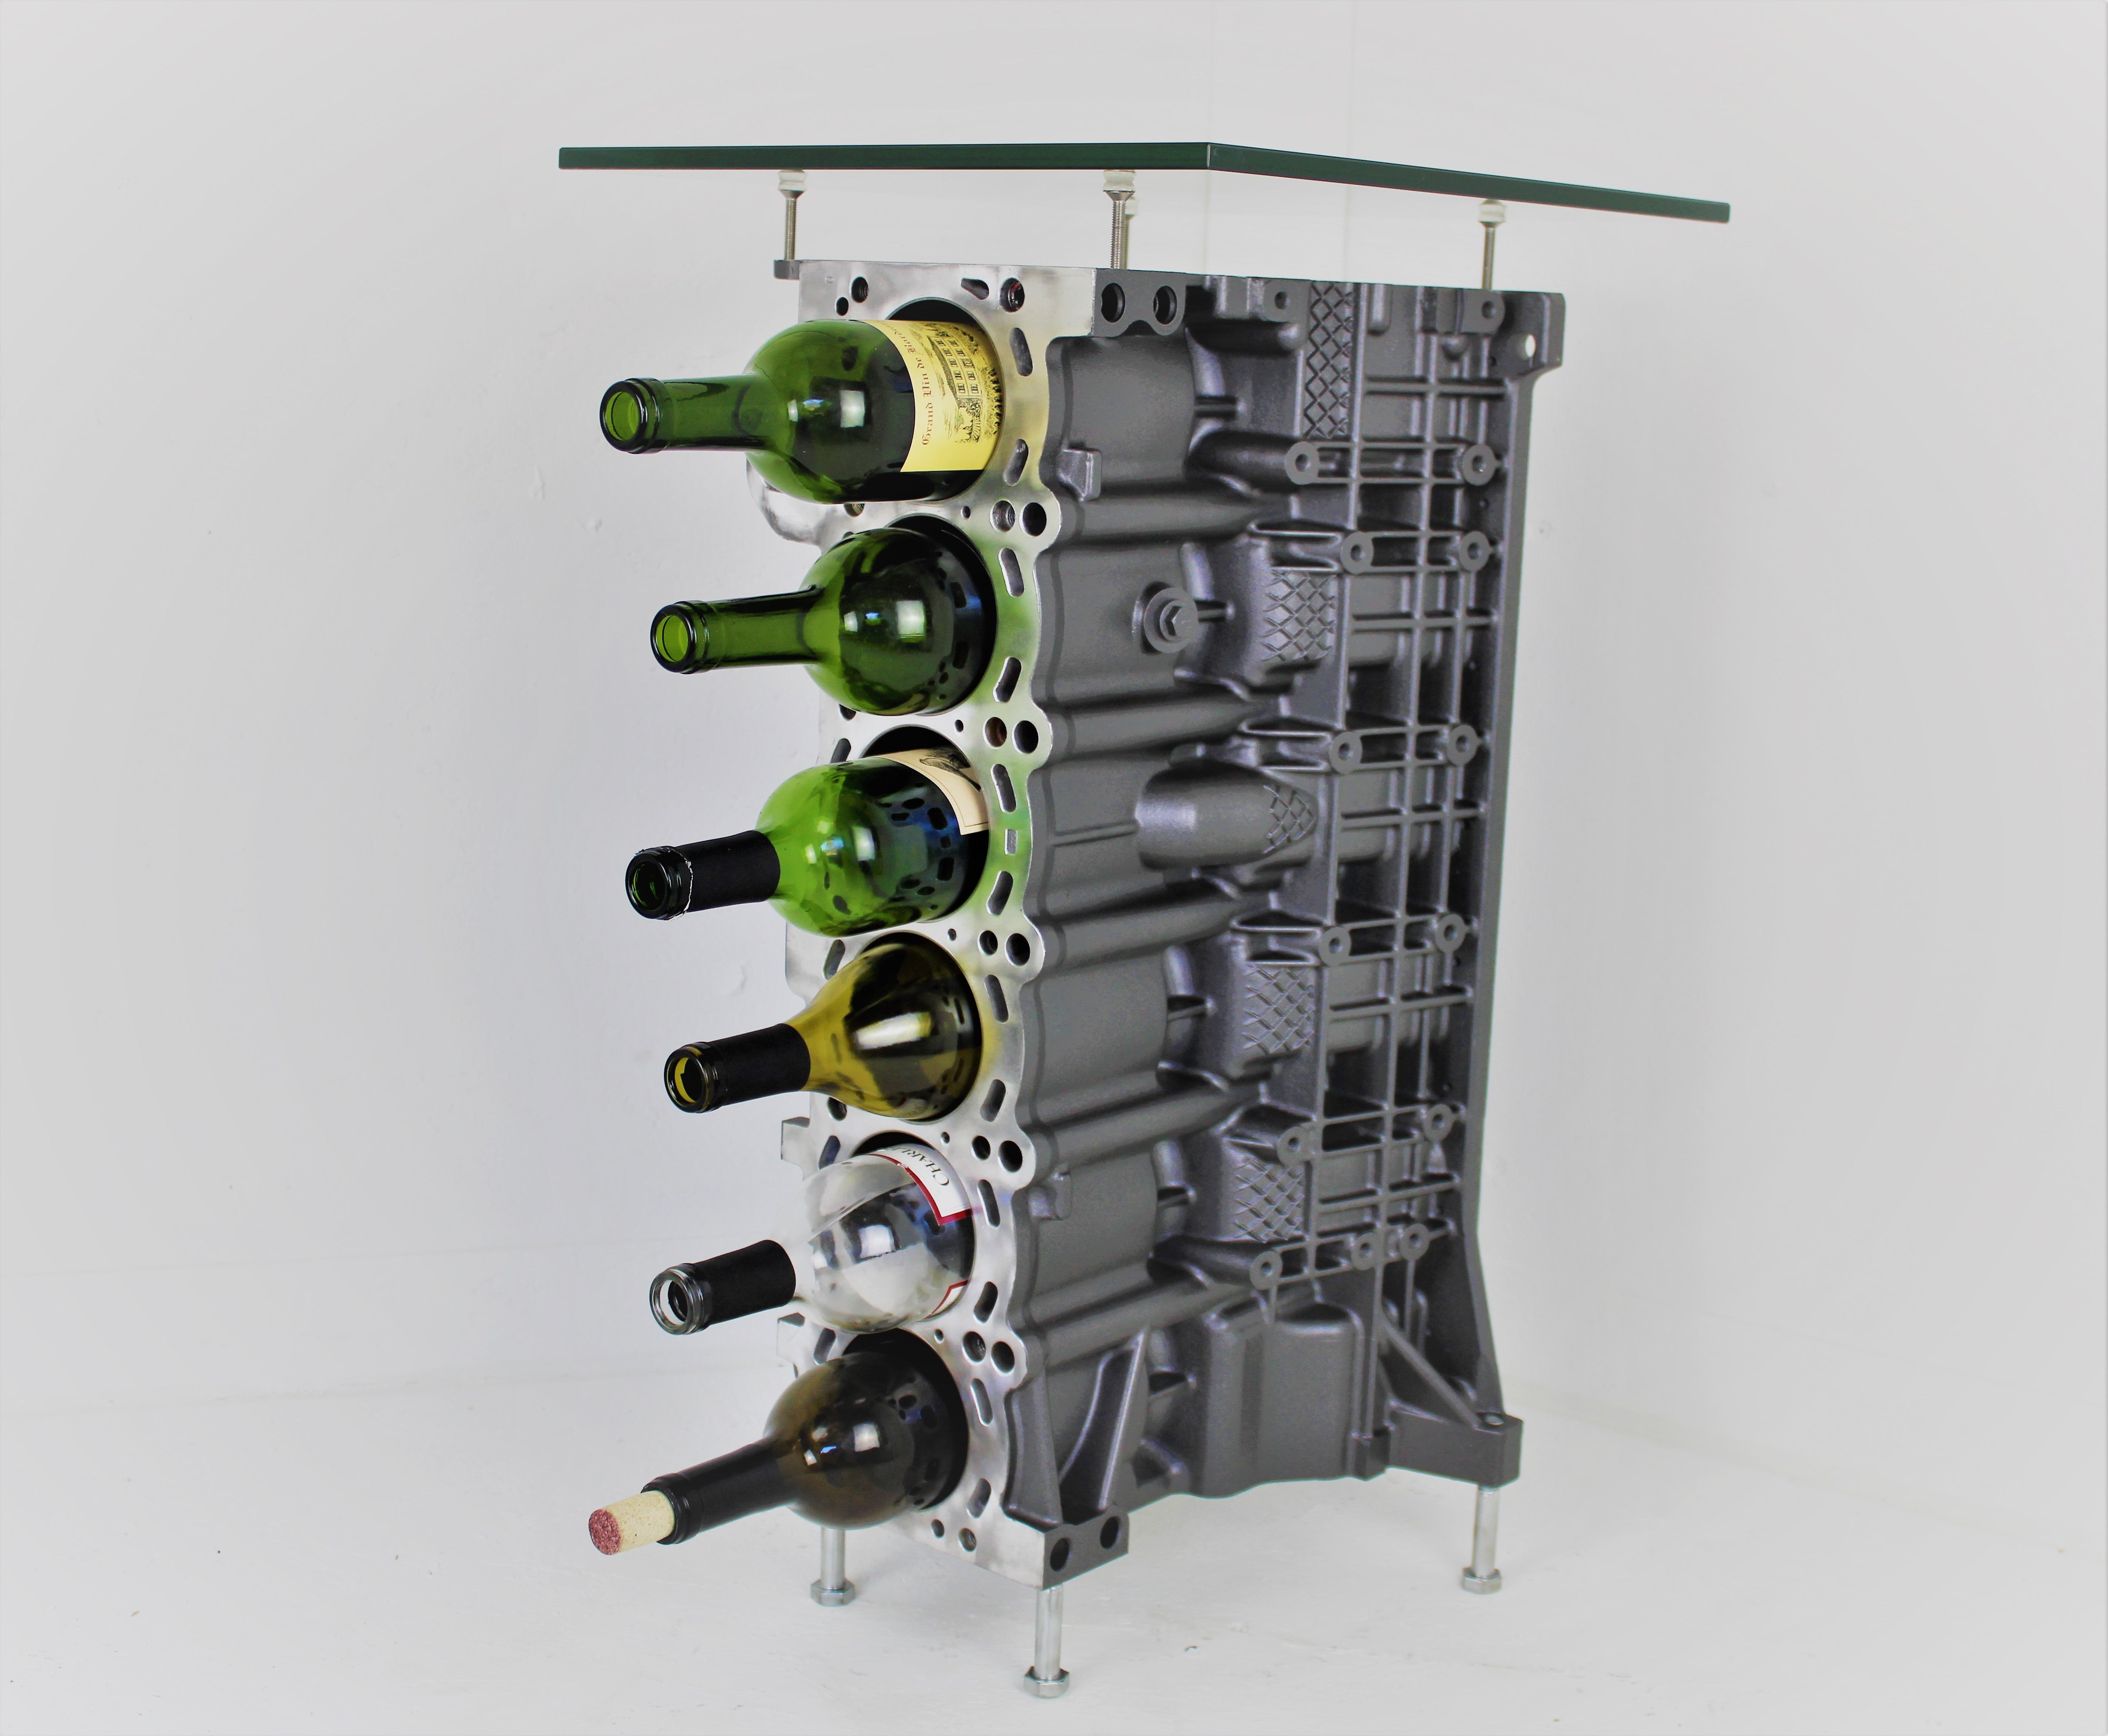 BMW end table and wine rack with six wine bottles stored inside, finished in gunmetal grey with a square glass top.